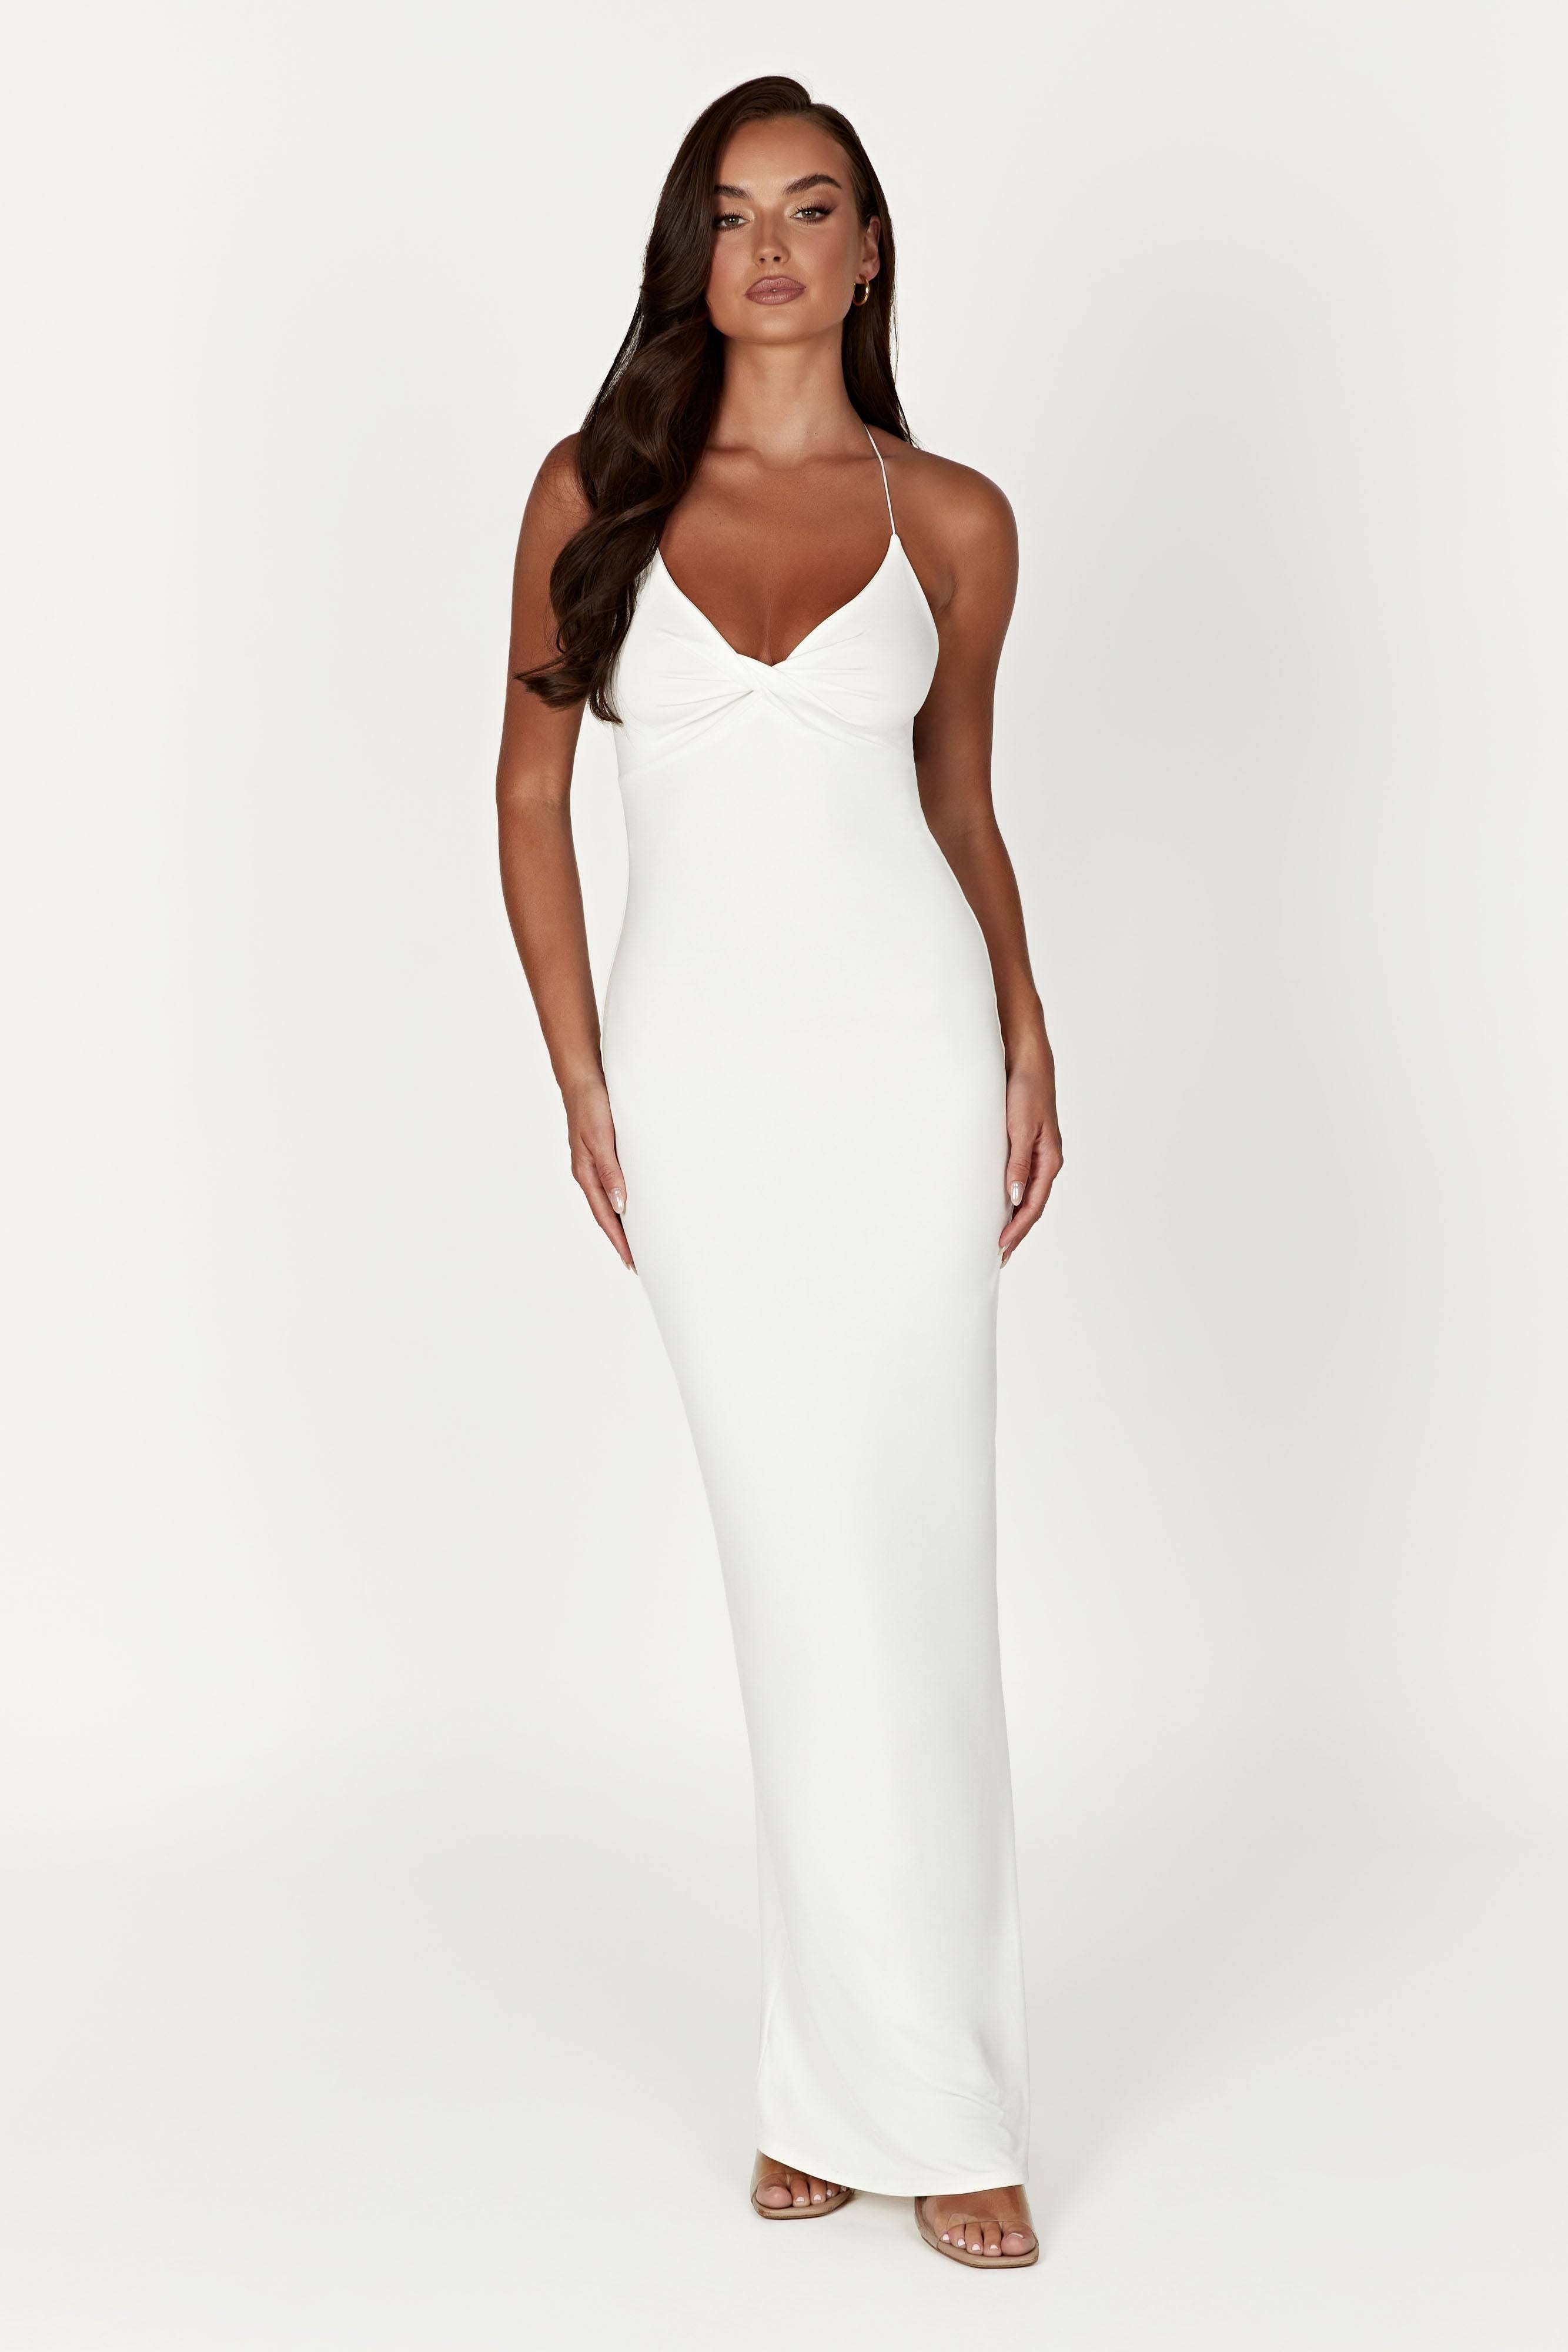 Twisted Maxi Dress: Affordable & Comfortable 18th Birthday Outfit | Image